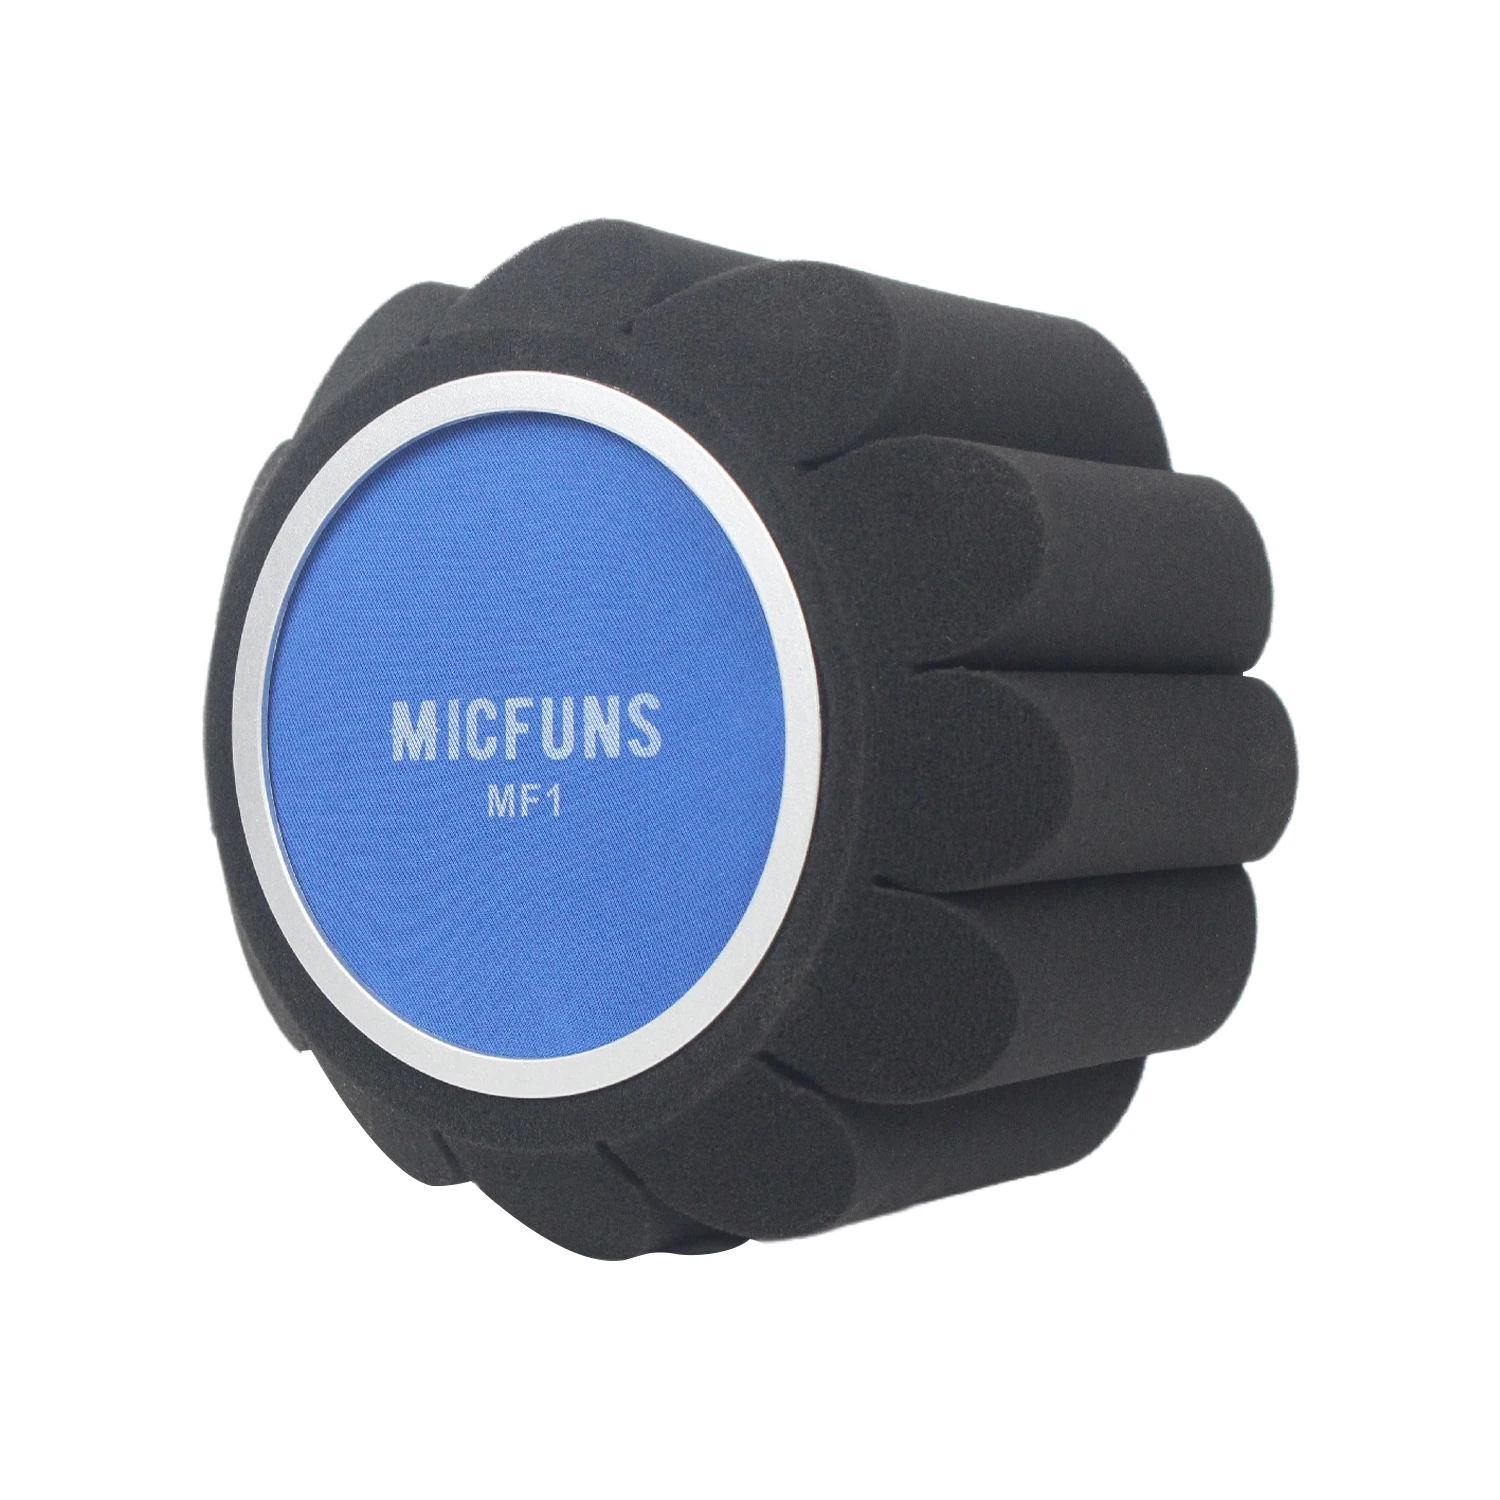 

MICFUNS MF1 1.77-1.97'' Noise Reduction Boom Microphone Screen Sound/Windproof Enclosure Sponge Cover for Recording Broadcasting